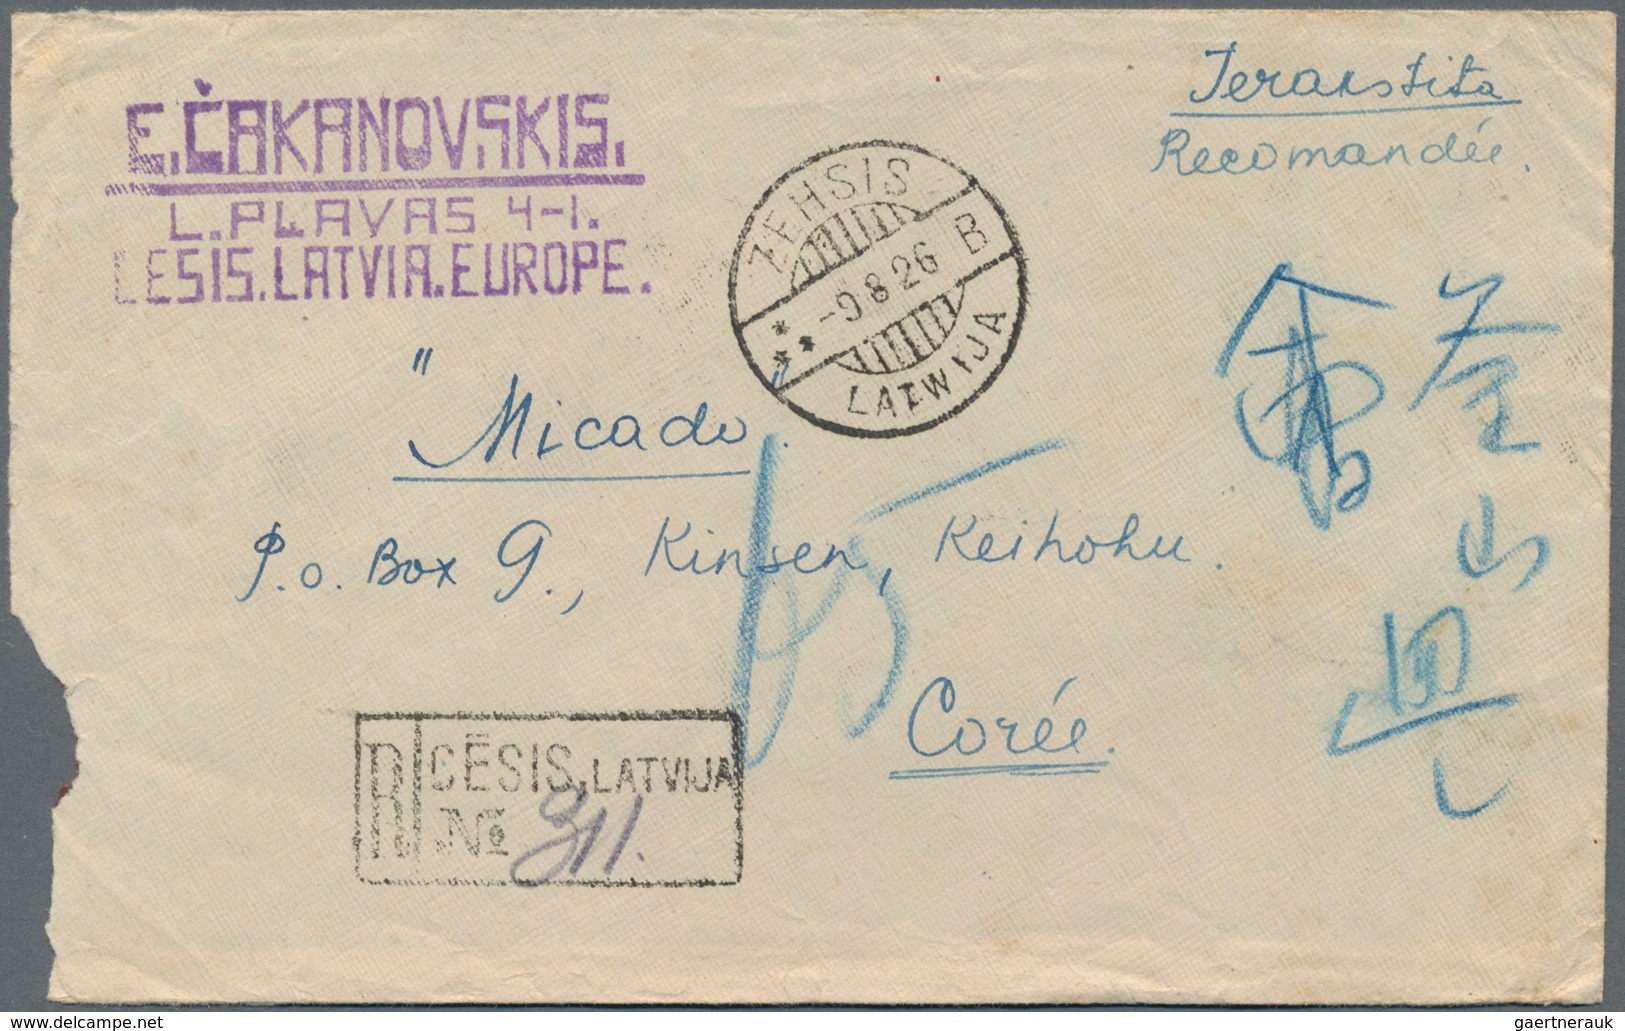 Lettland: 1924/26, Two Covers To Kinsen/Korea From Latvia Resp. Lithuania: Registered From "ZEHSIS 9 - Letonia